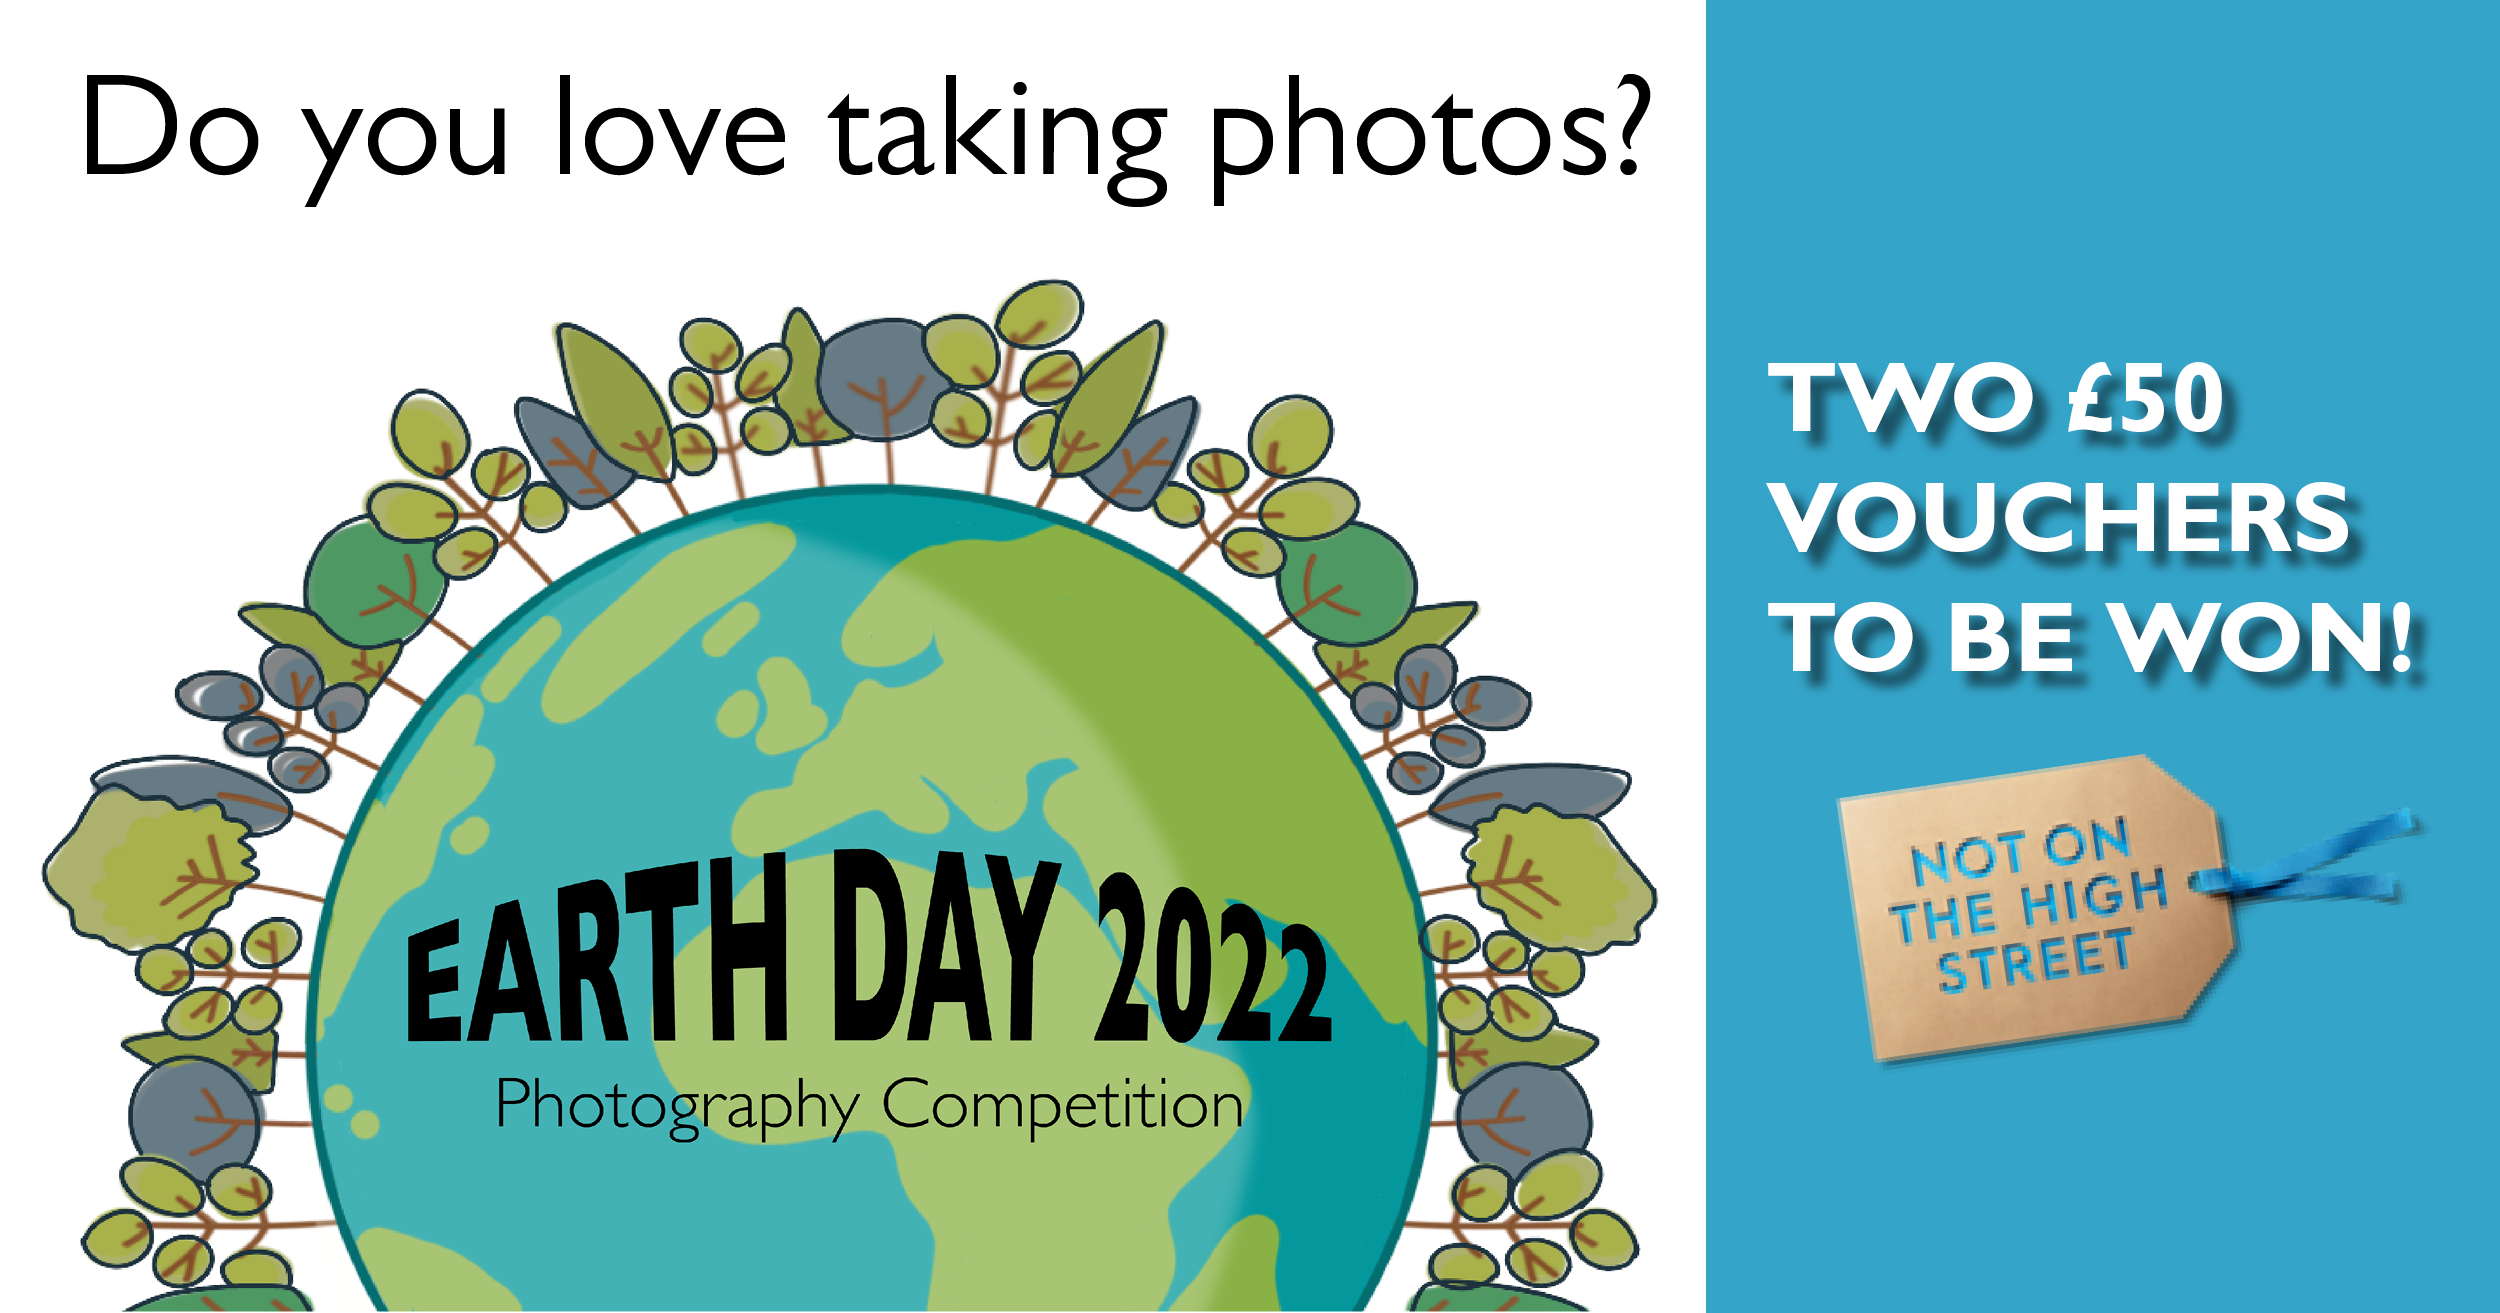 Show off your photography skills for Hinckley & Rugby’s Earth Day competition